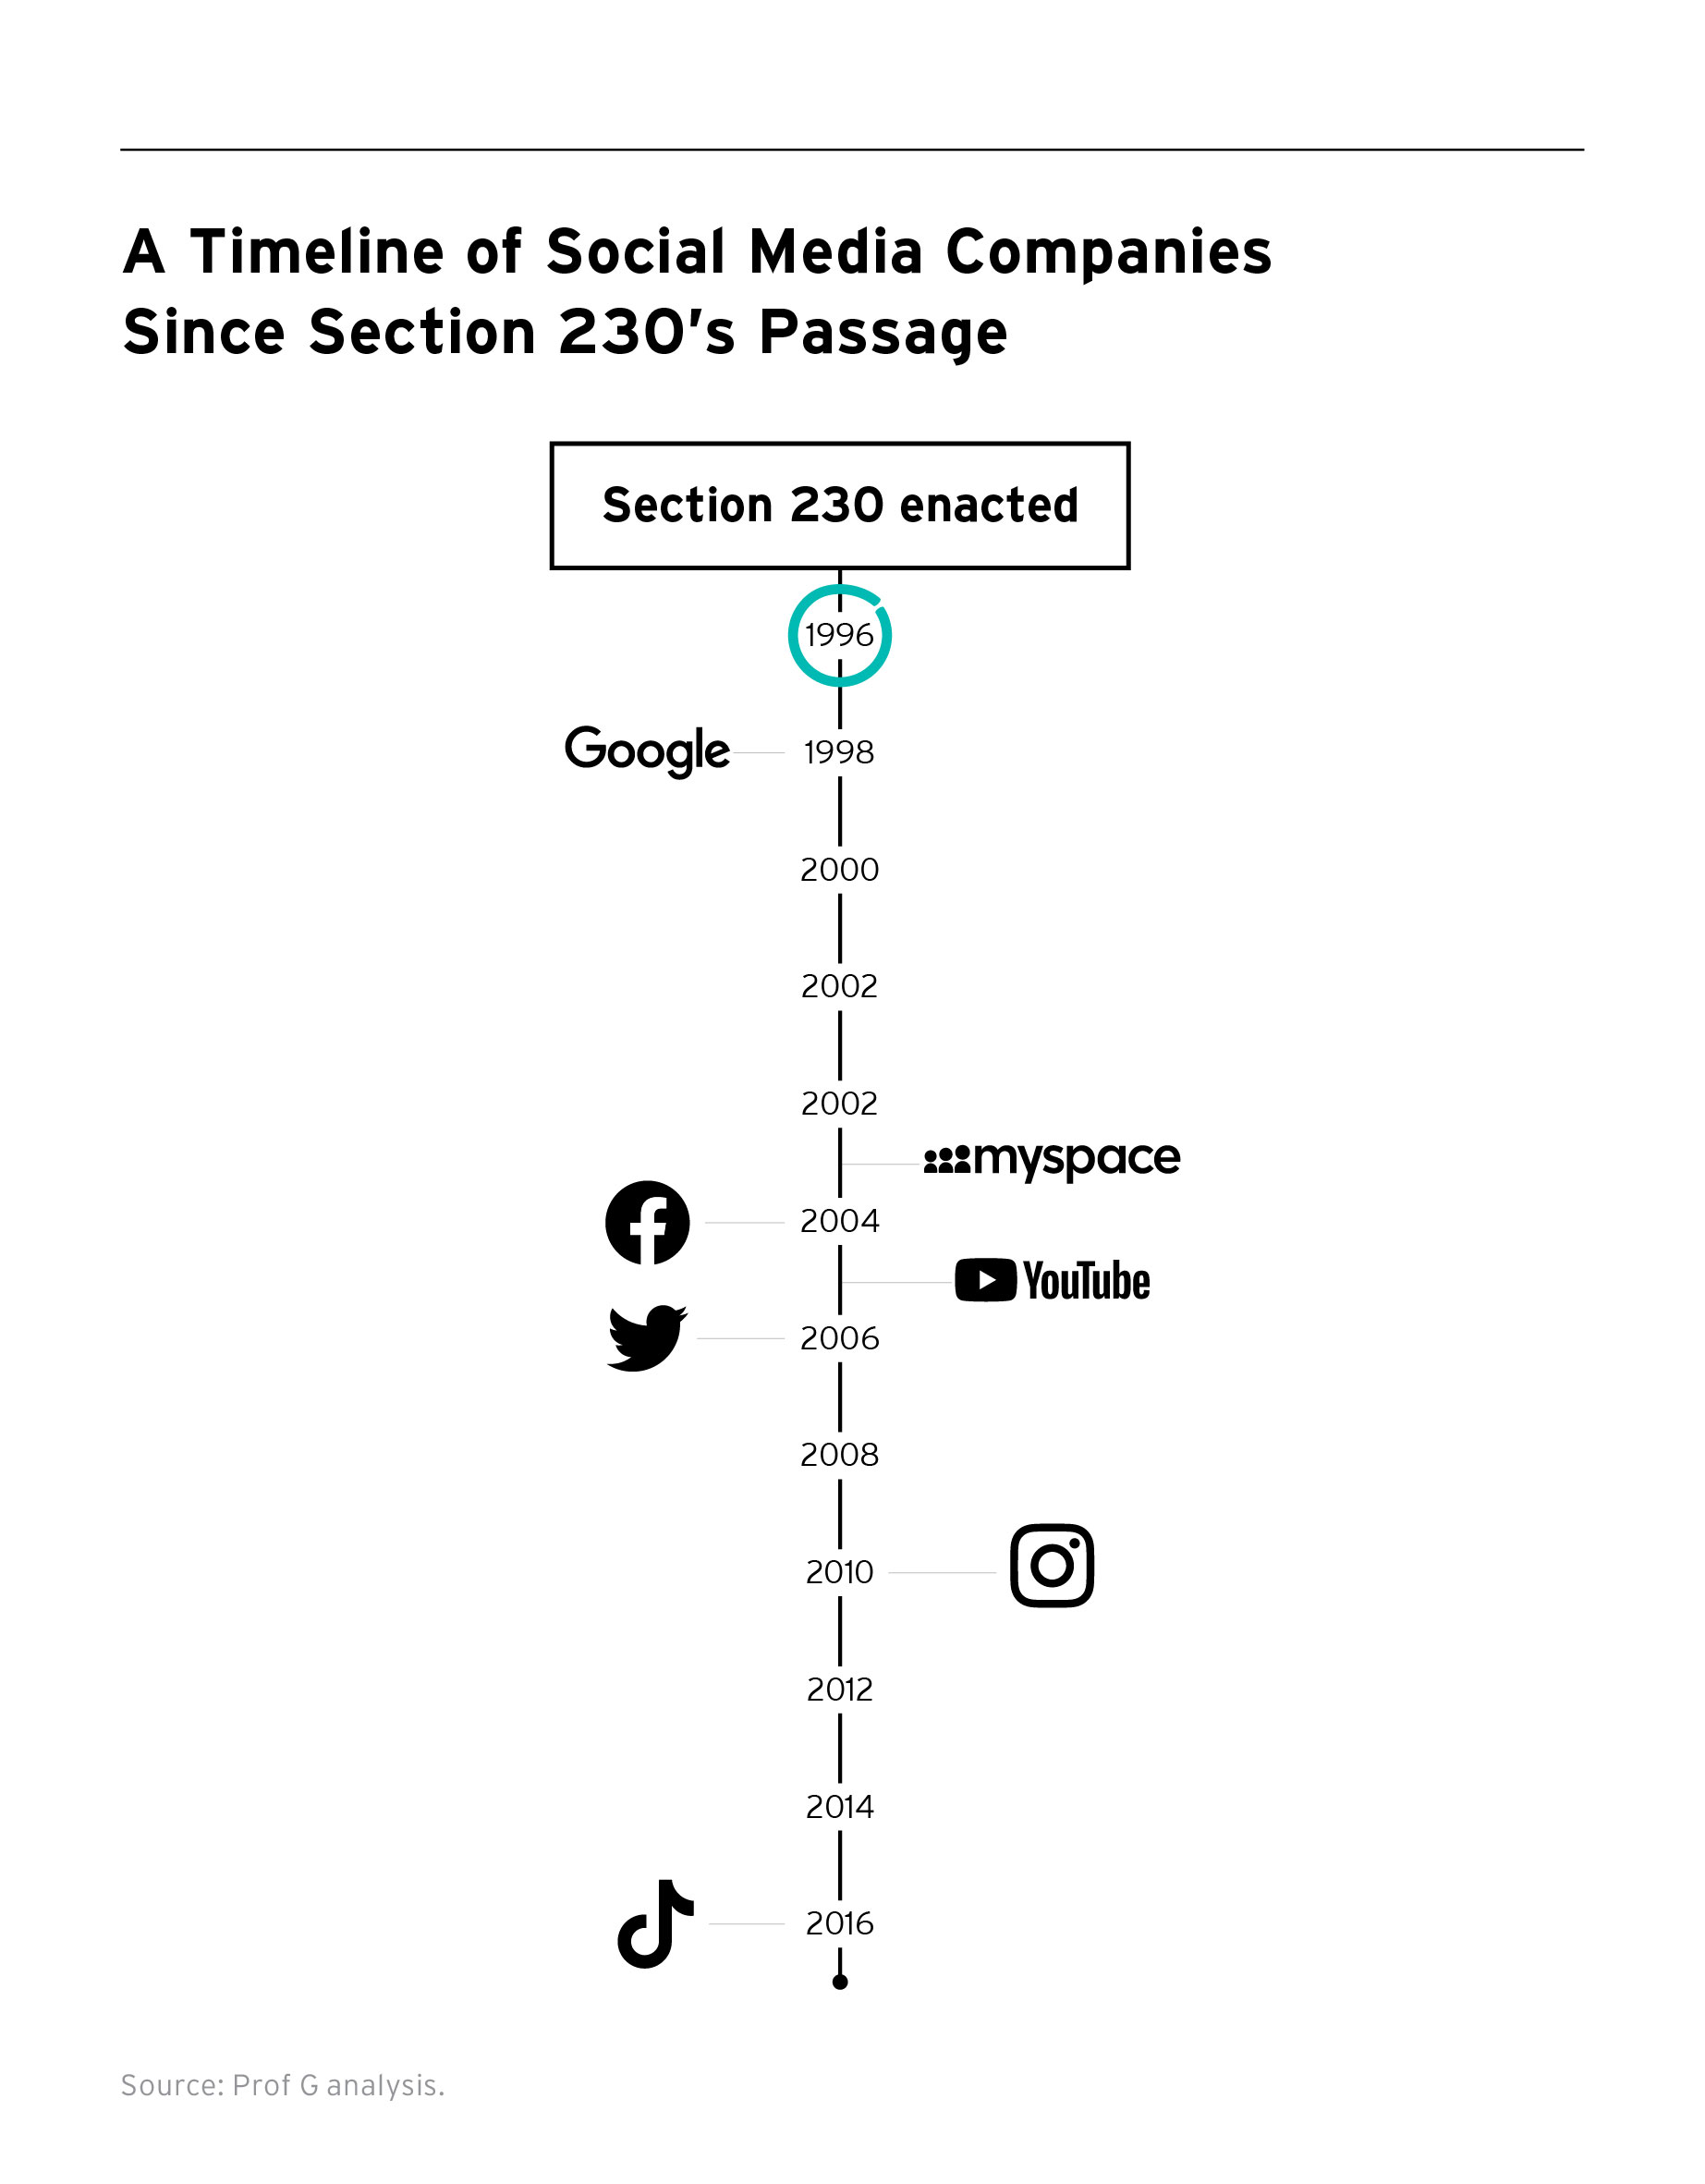 a timeline of social media companies since Section 230’s passage